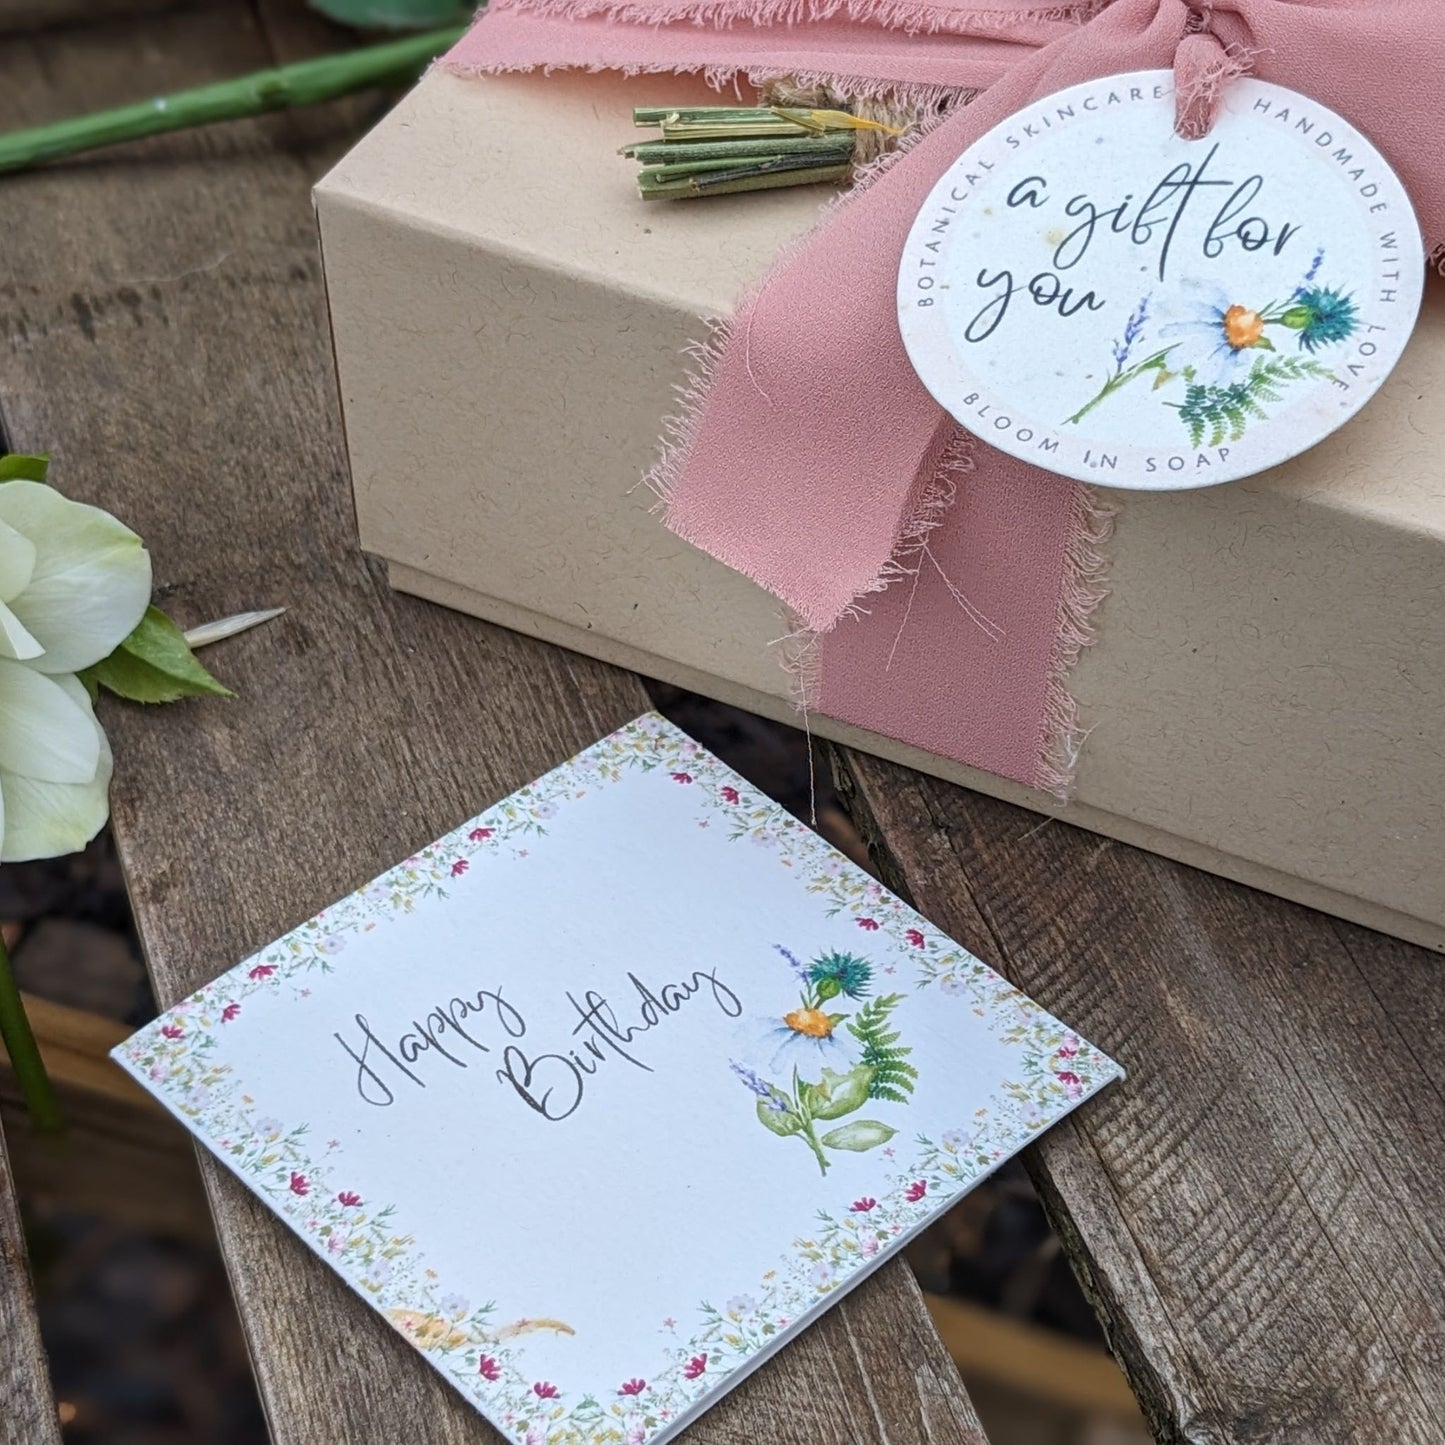 Gift Box and card from Bloom In Soap